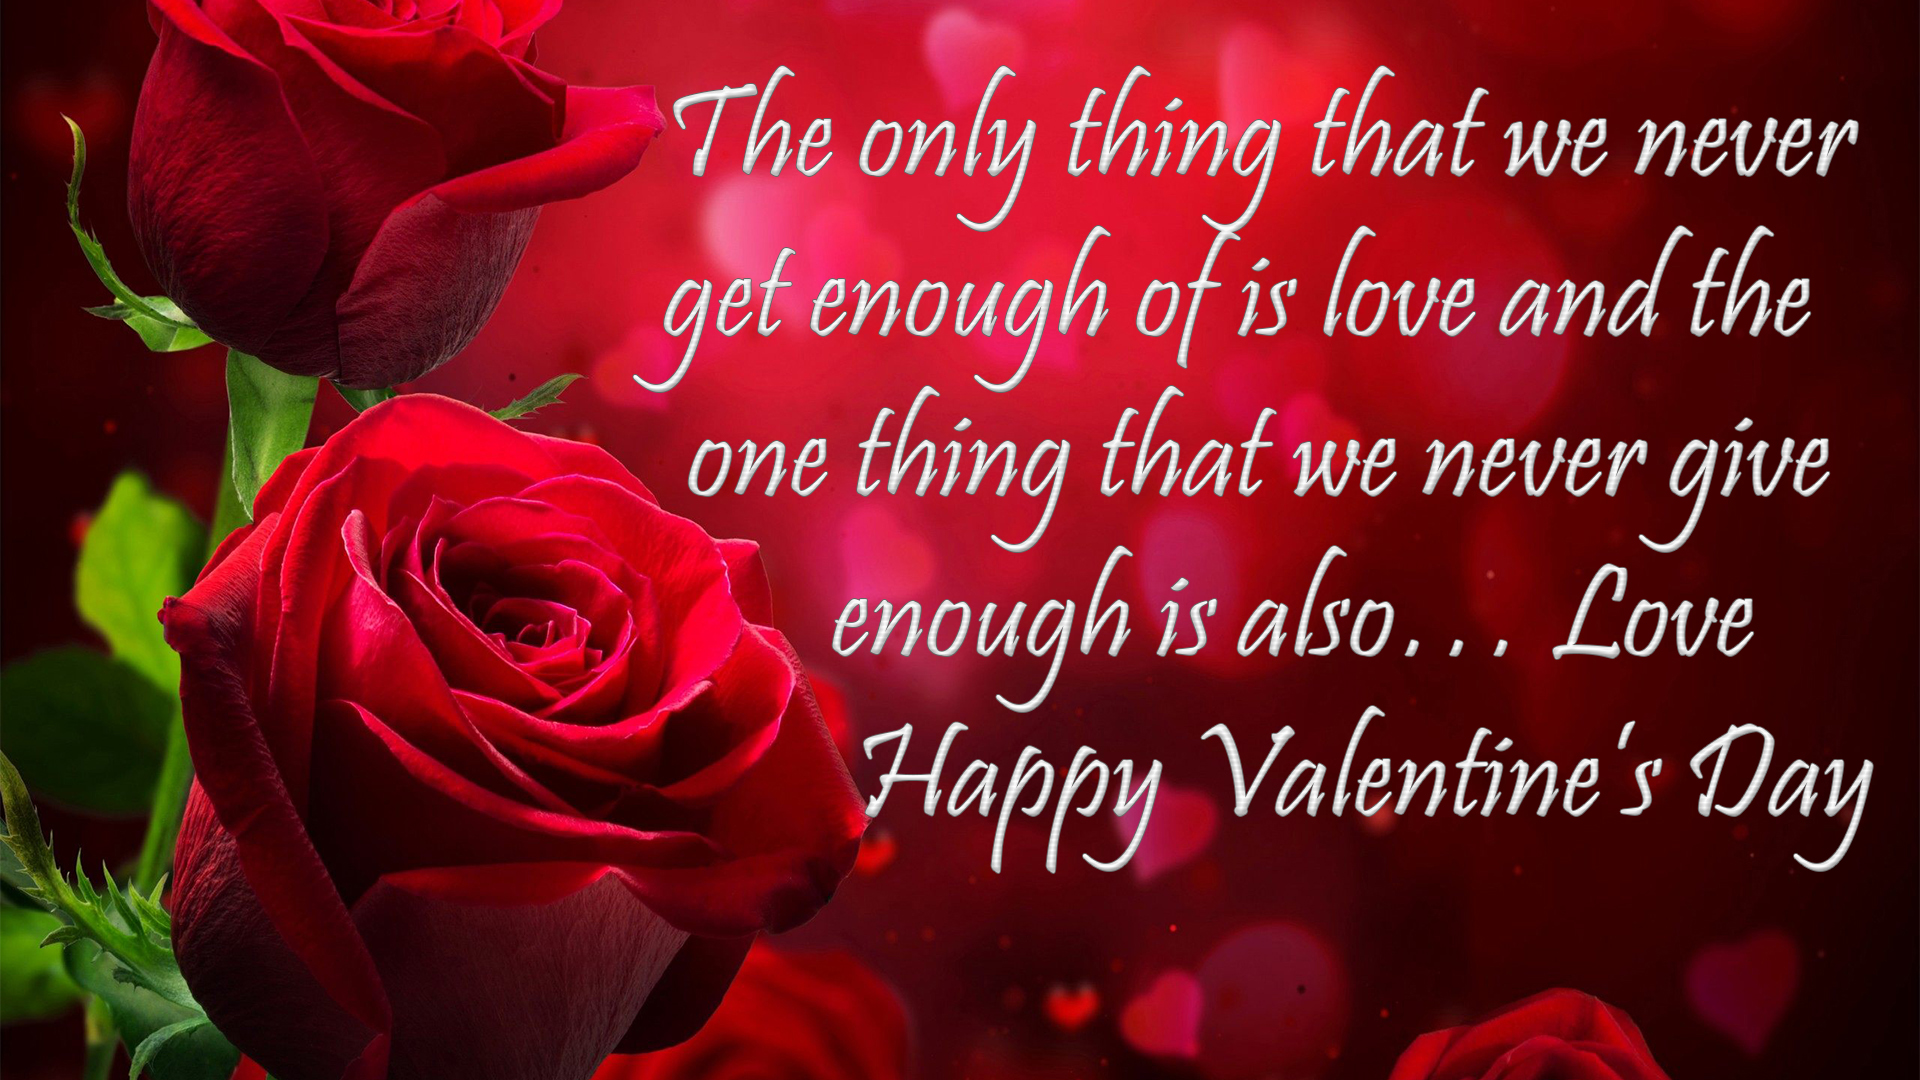 valentines day quote hd image